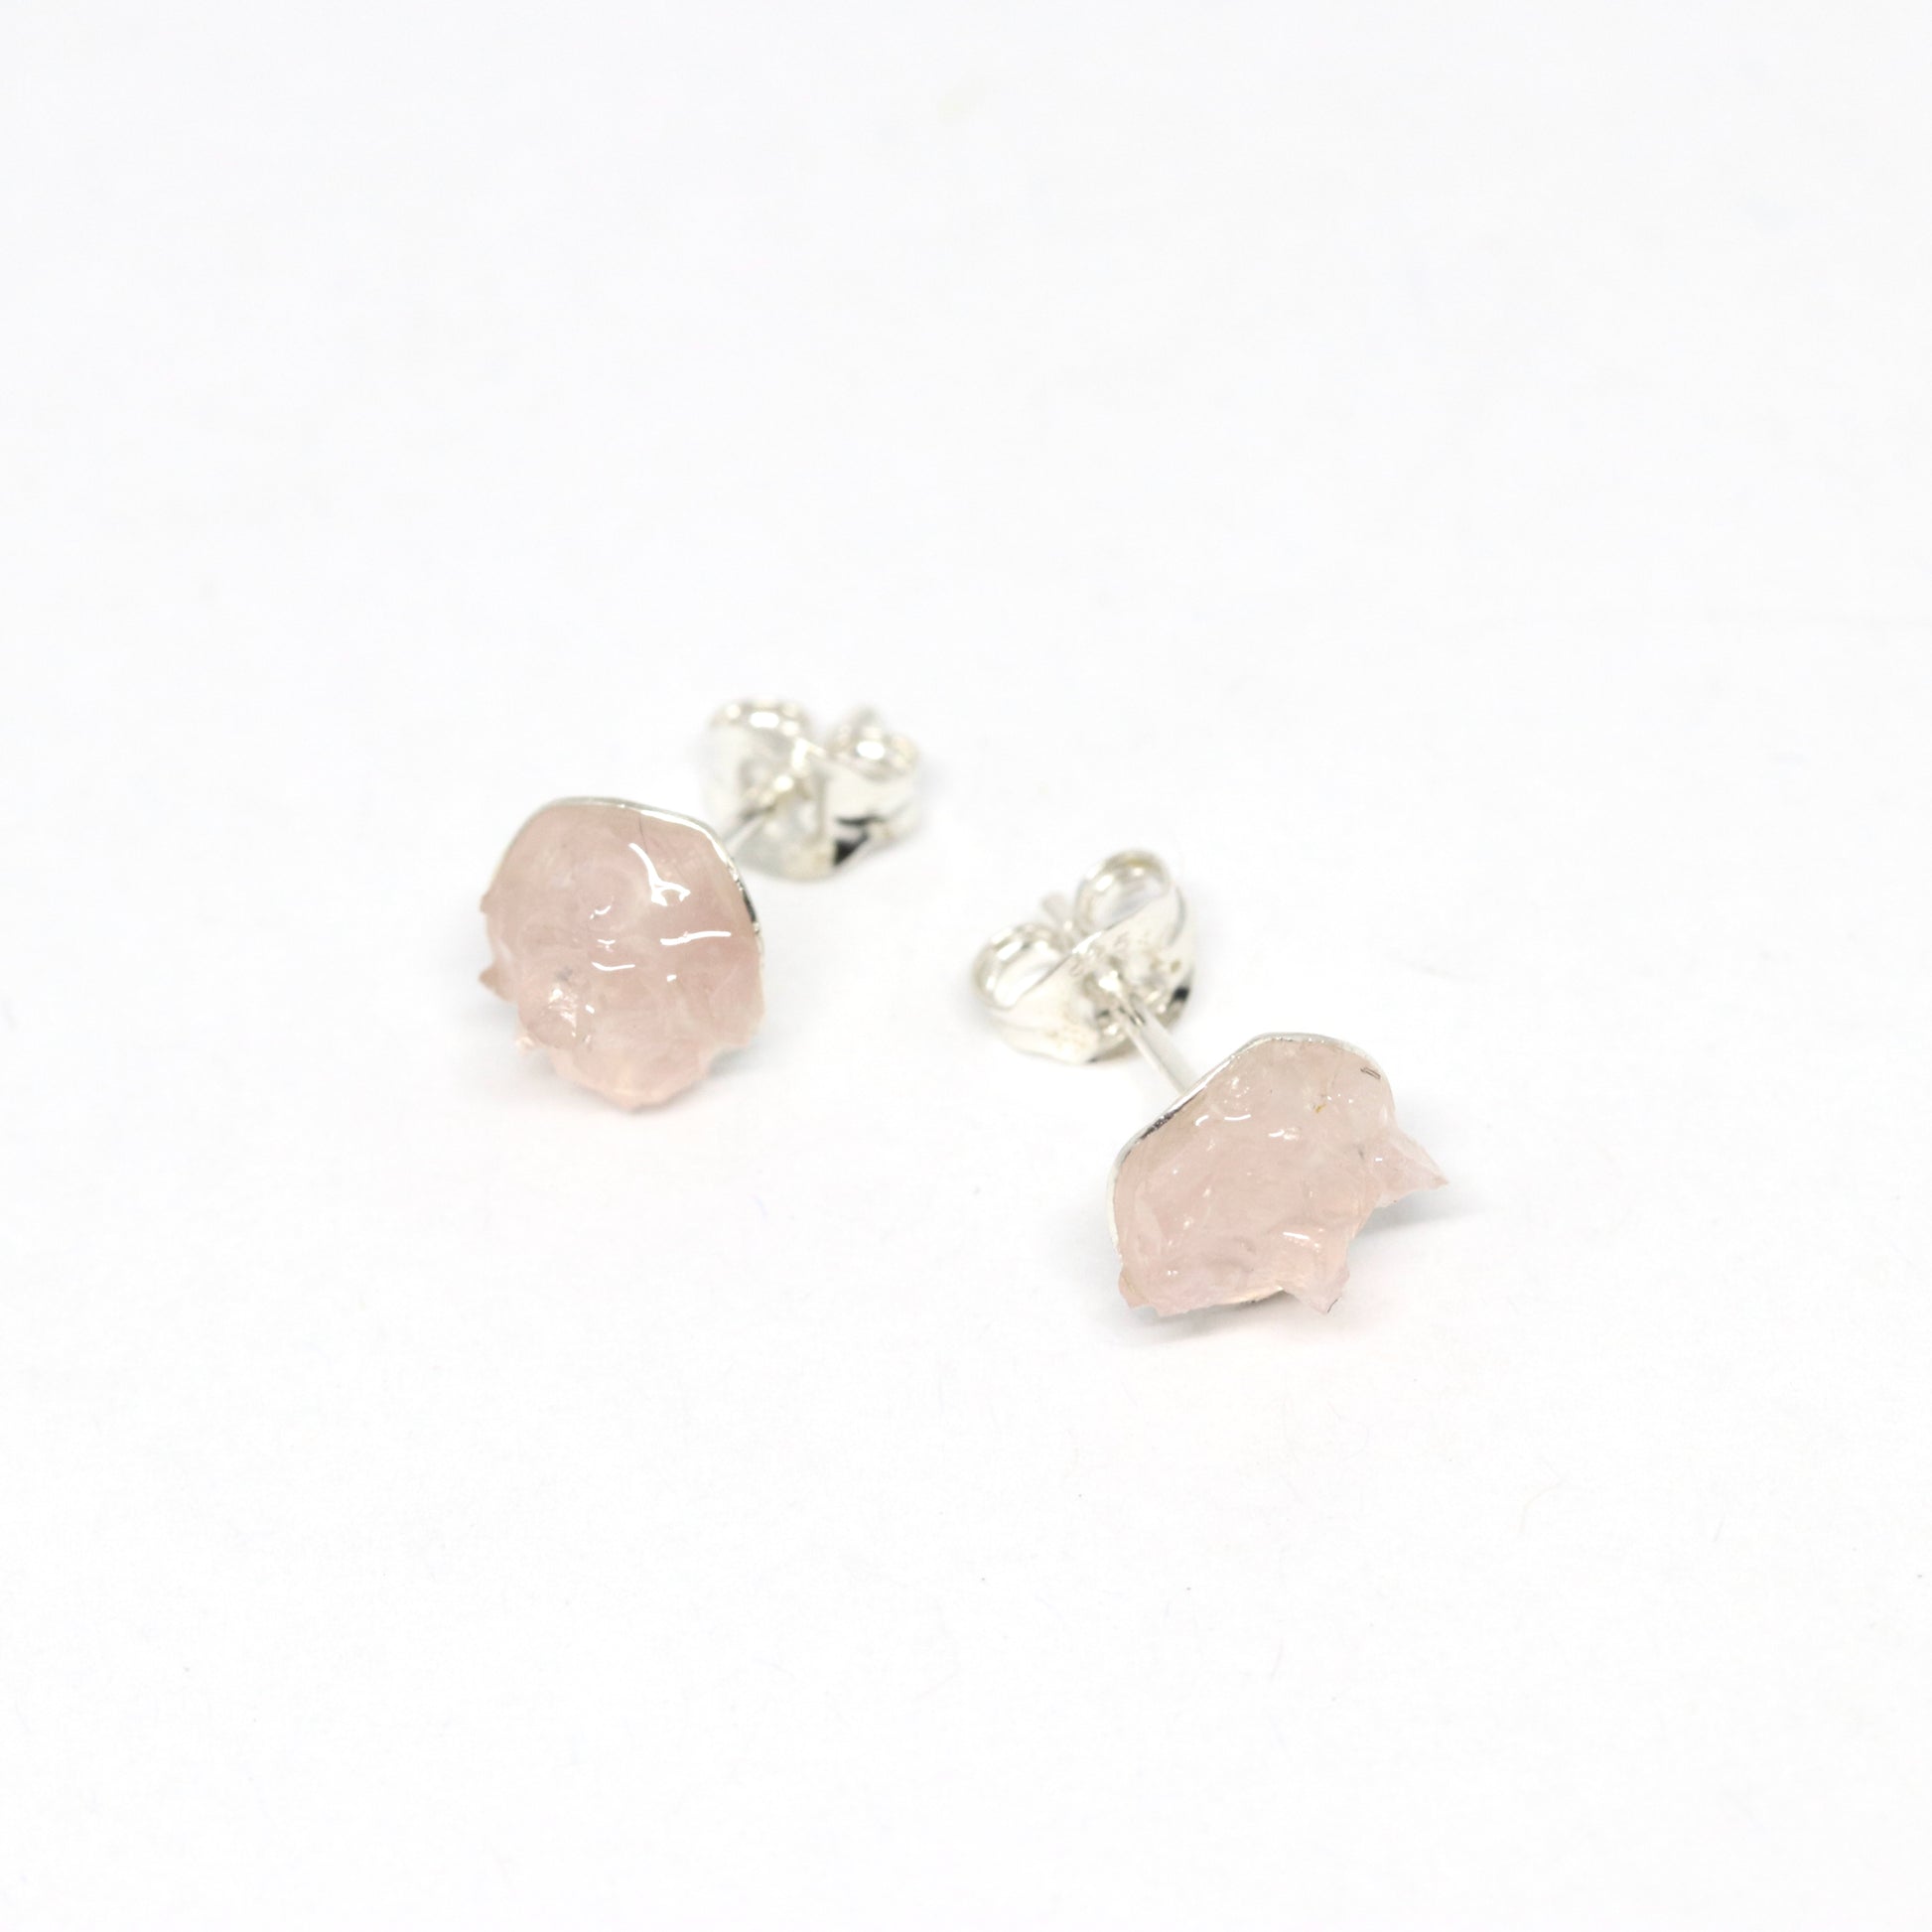 Pink Quartz. Gemstone and silver stud earrings. Made in Wanaka. Unique, colourful jewellery designed and crafted by New Zealand artist and jeweller Briar Hardy-Hesson.